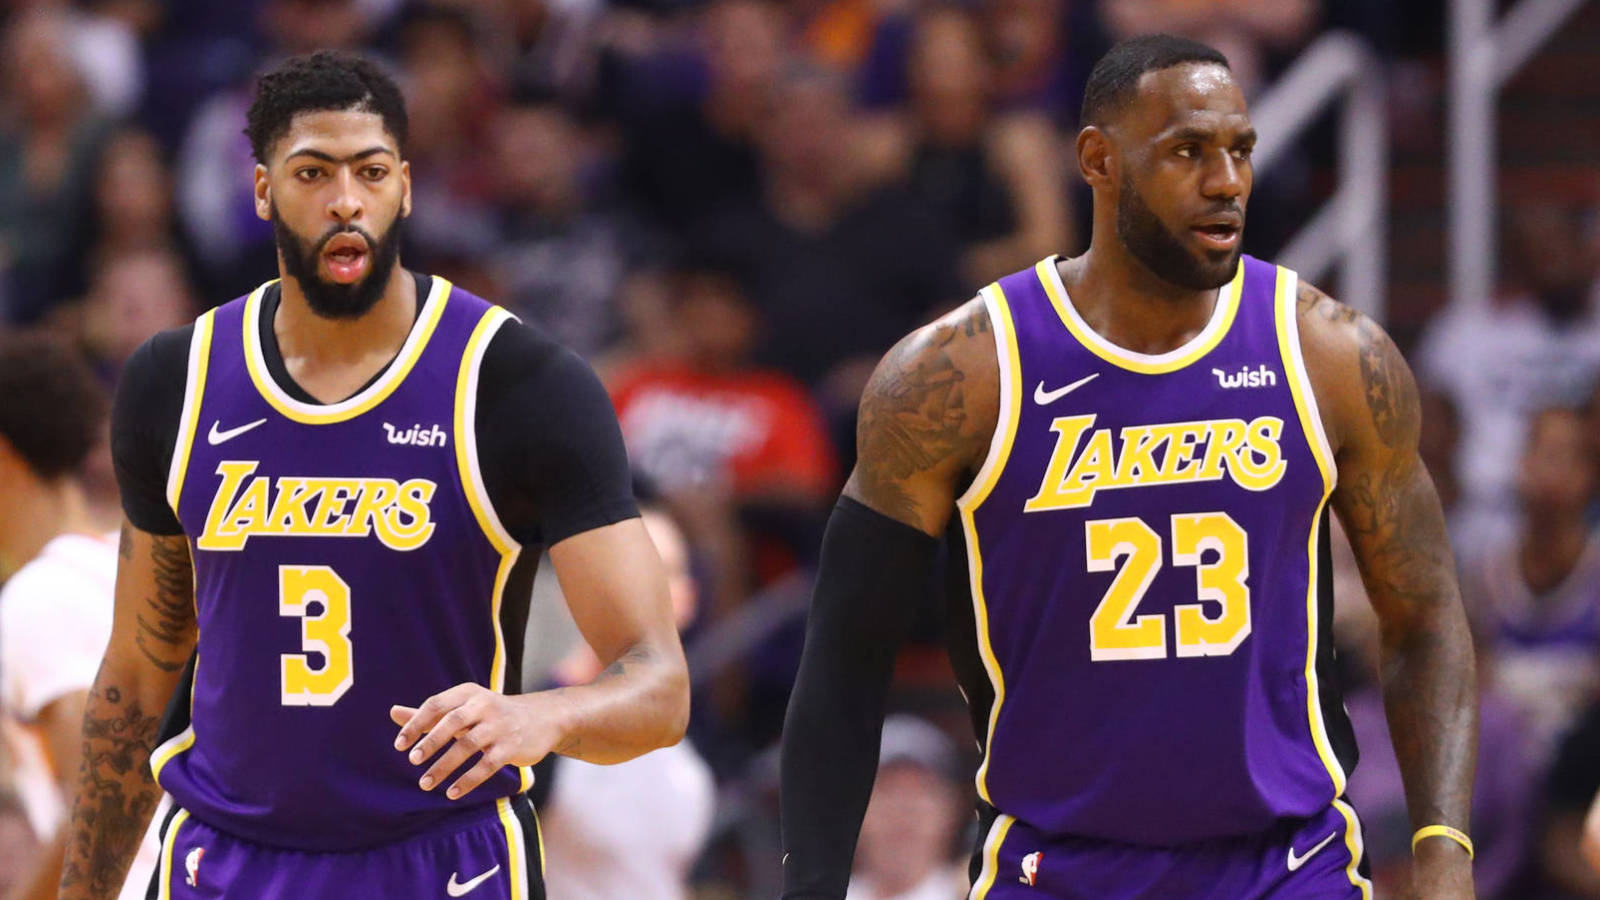 NBA dynamic duos: What pairings are rocking, struggling?